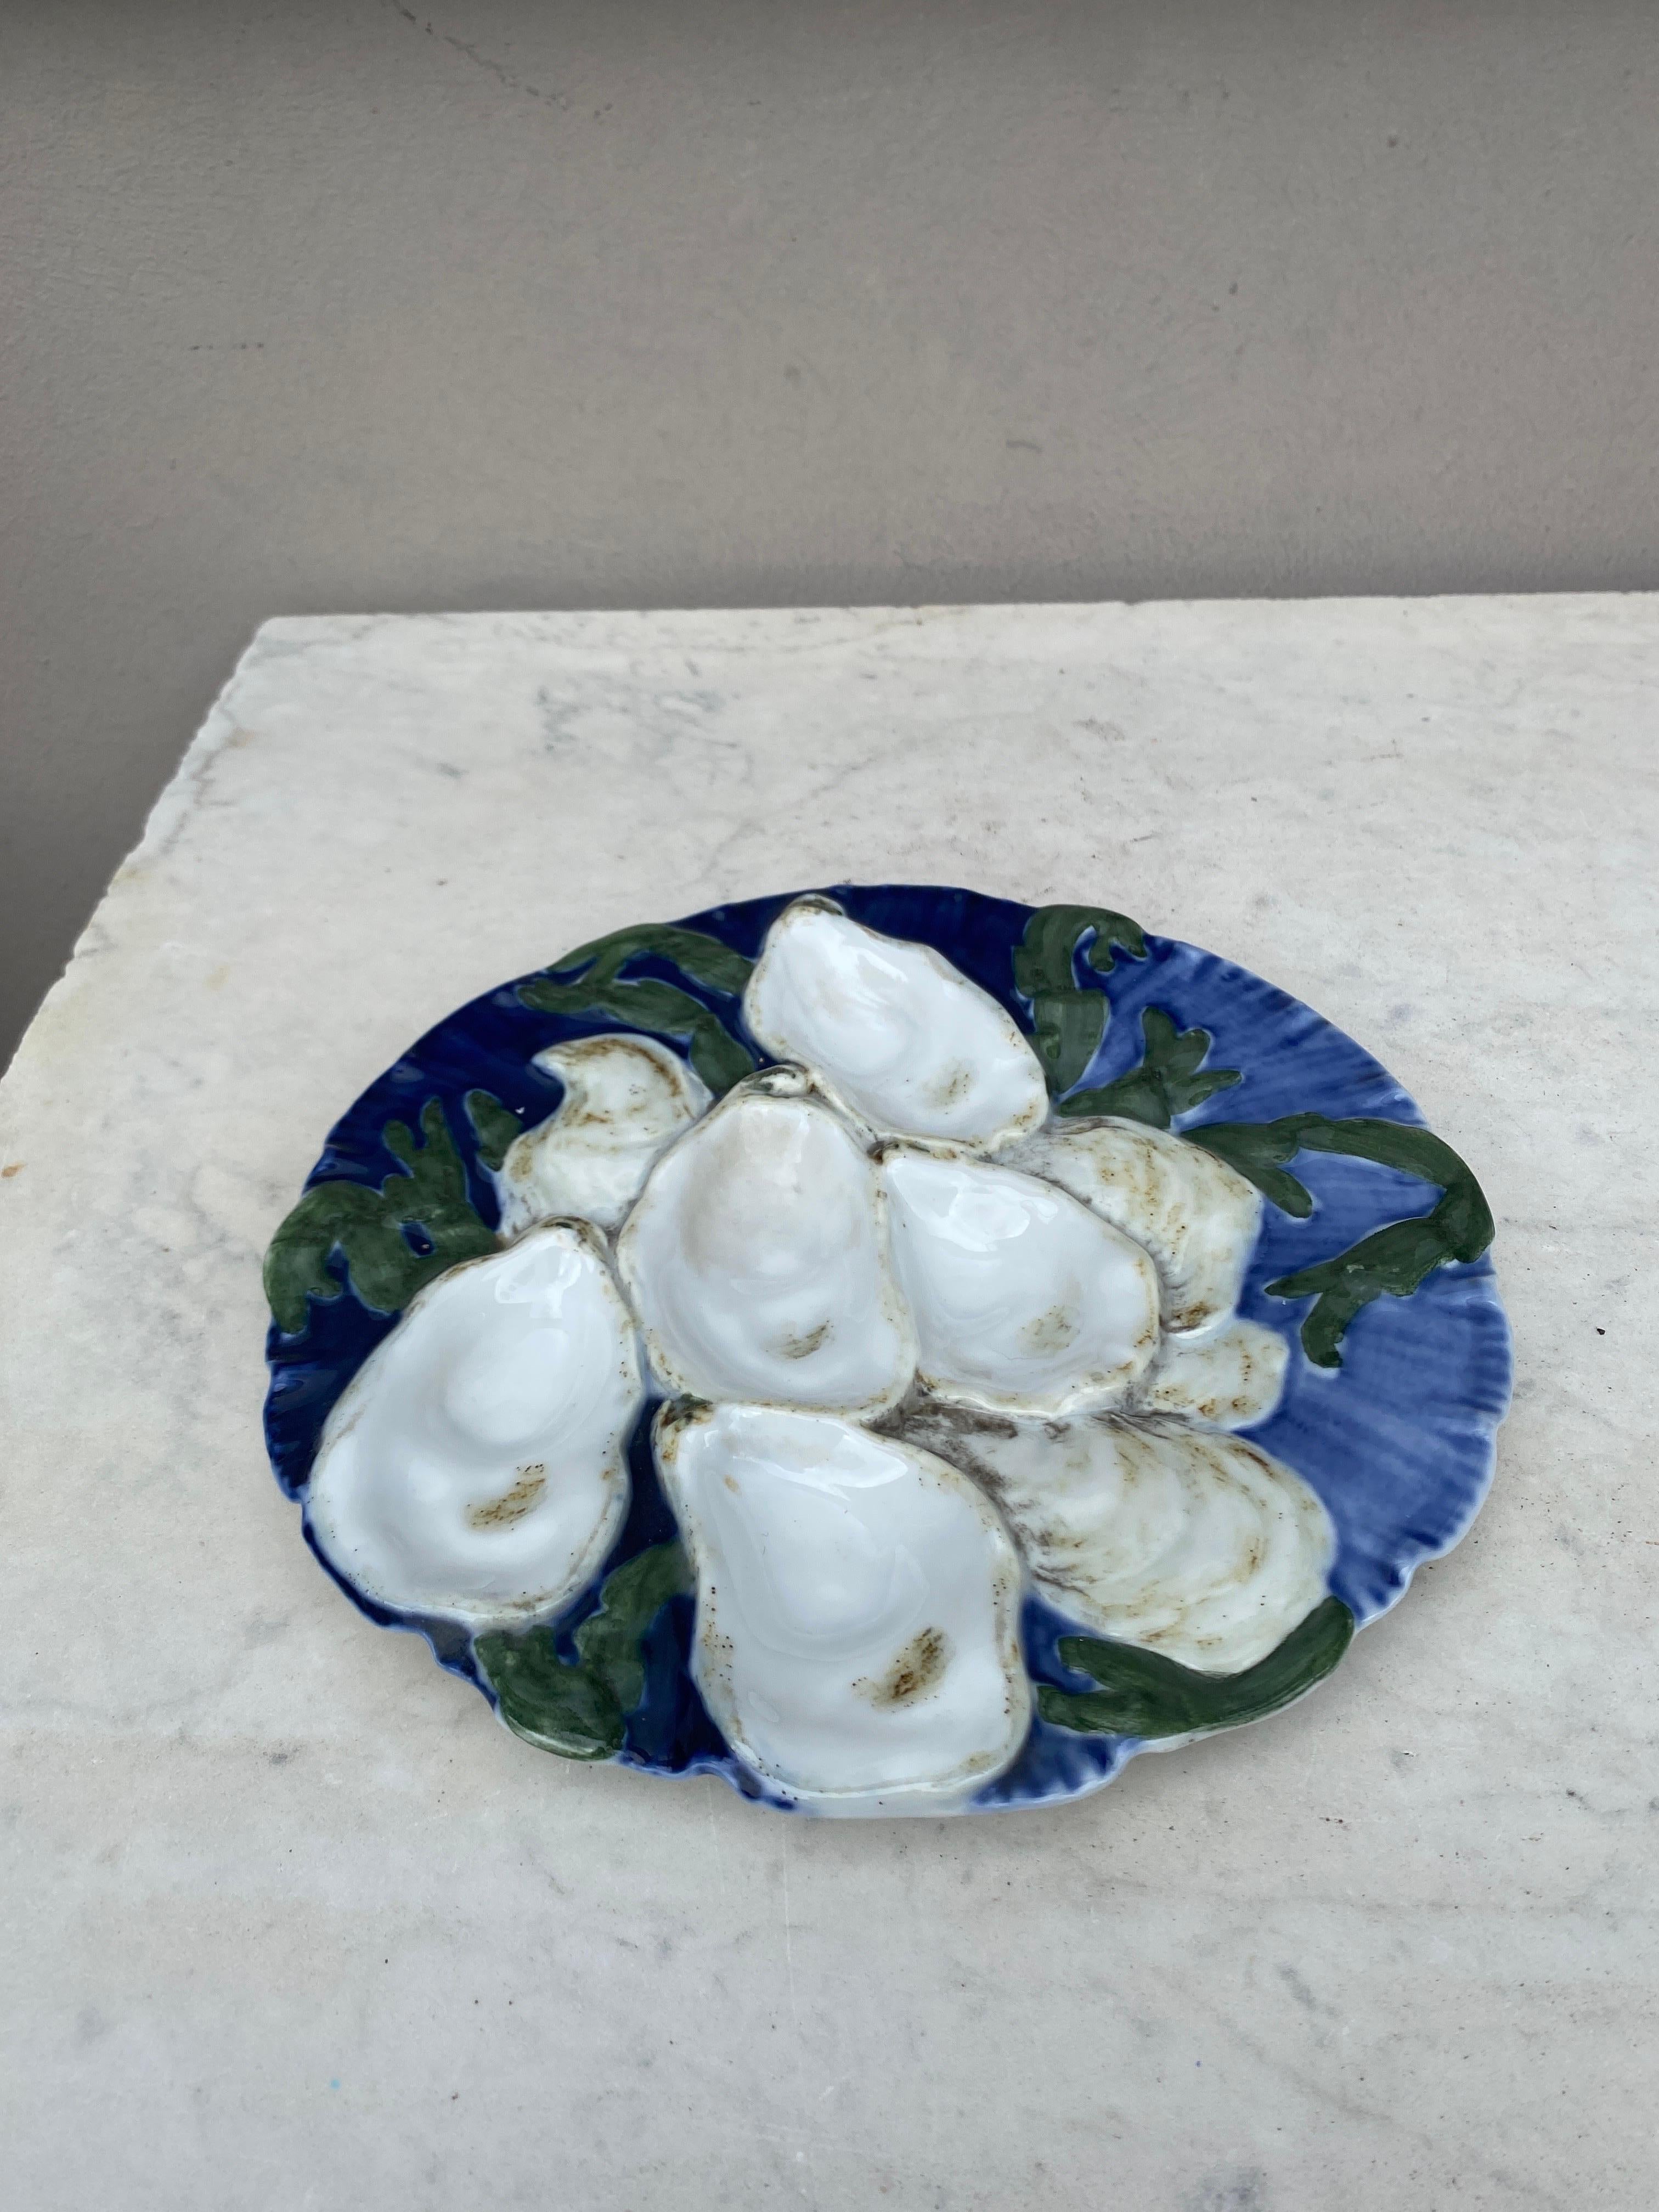 Antique 19th-century French porcelain oyster plate with turkey pattern signed Limoges Haviland.